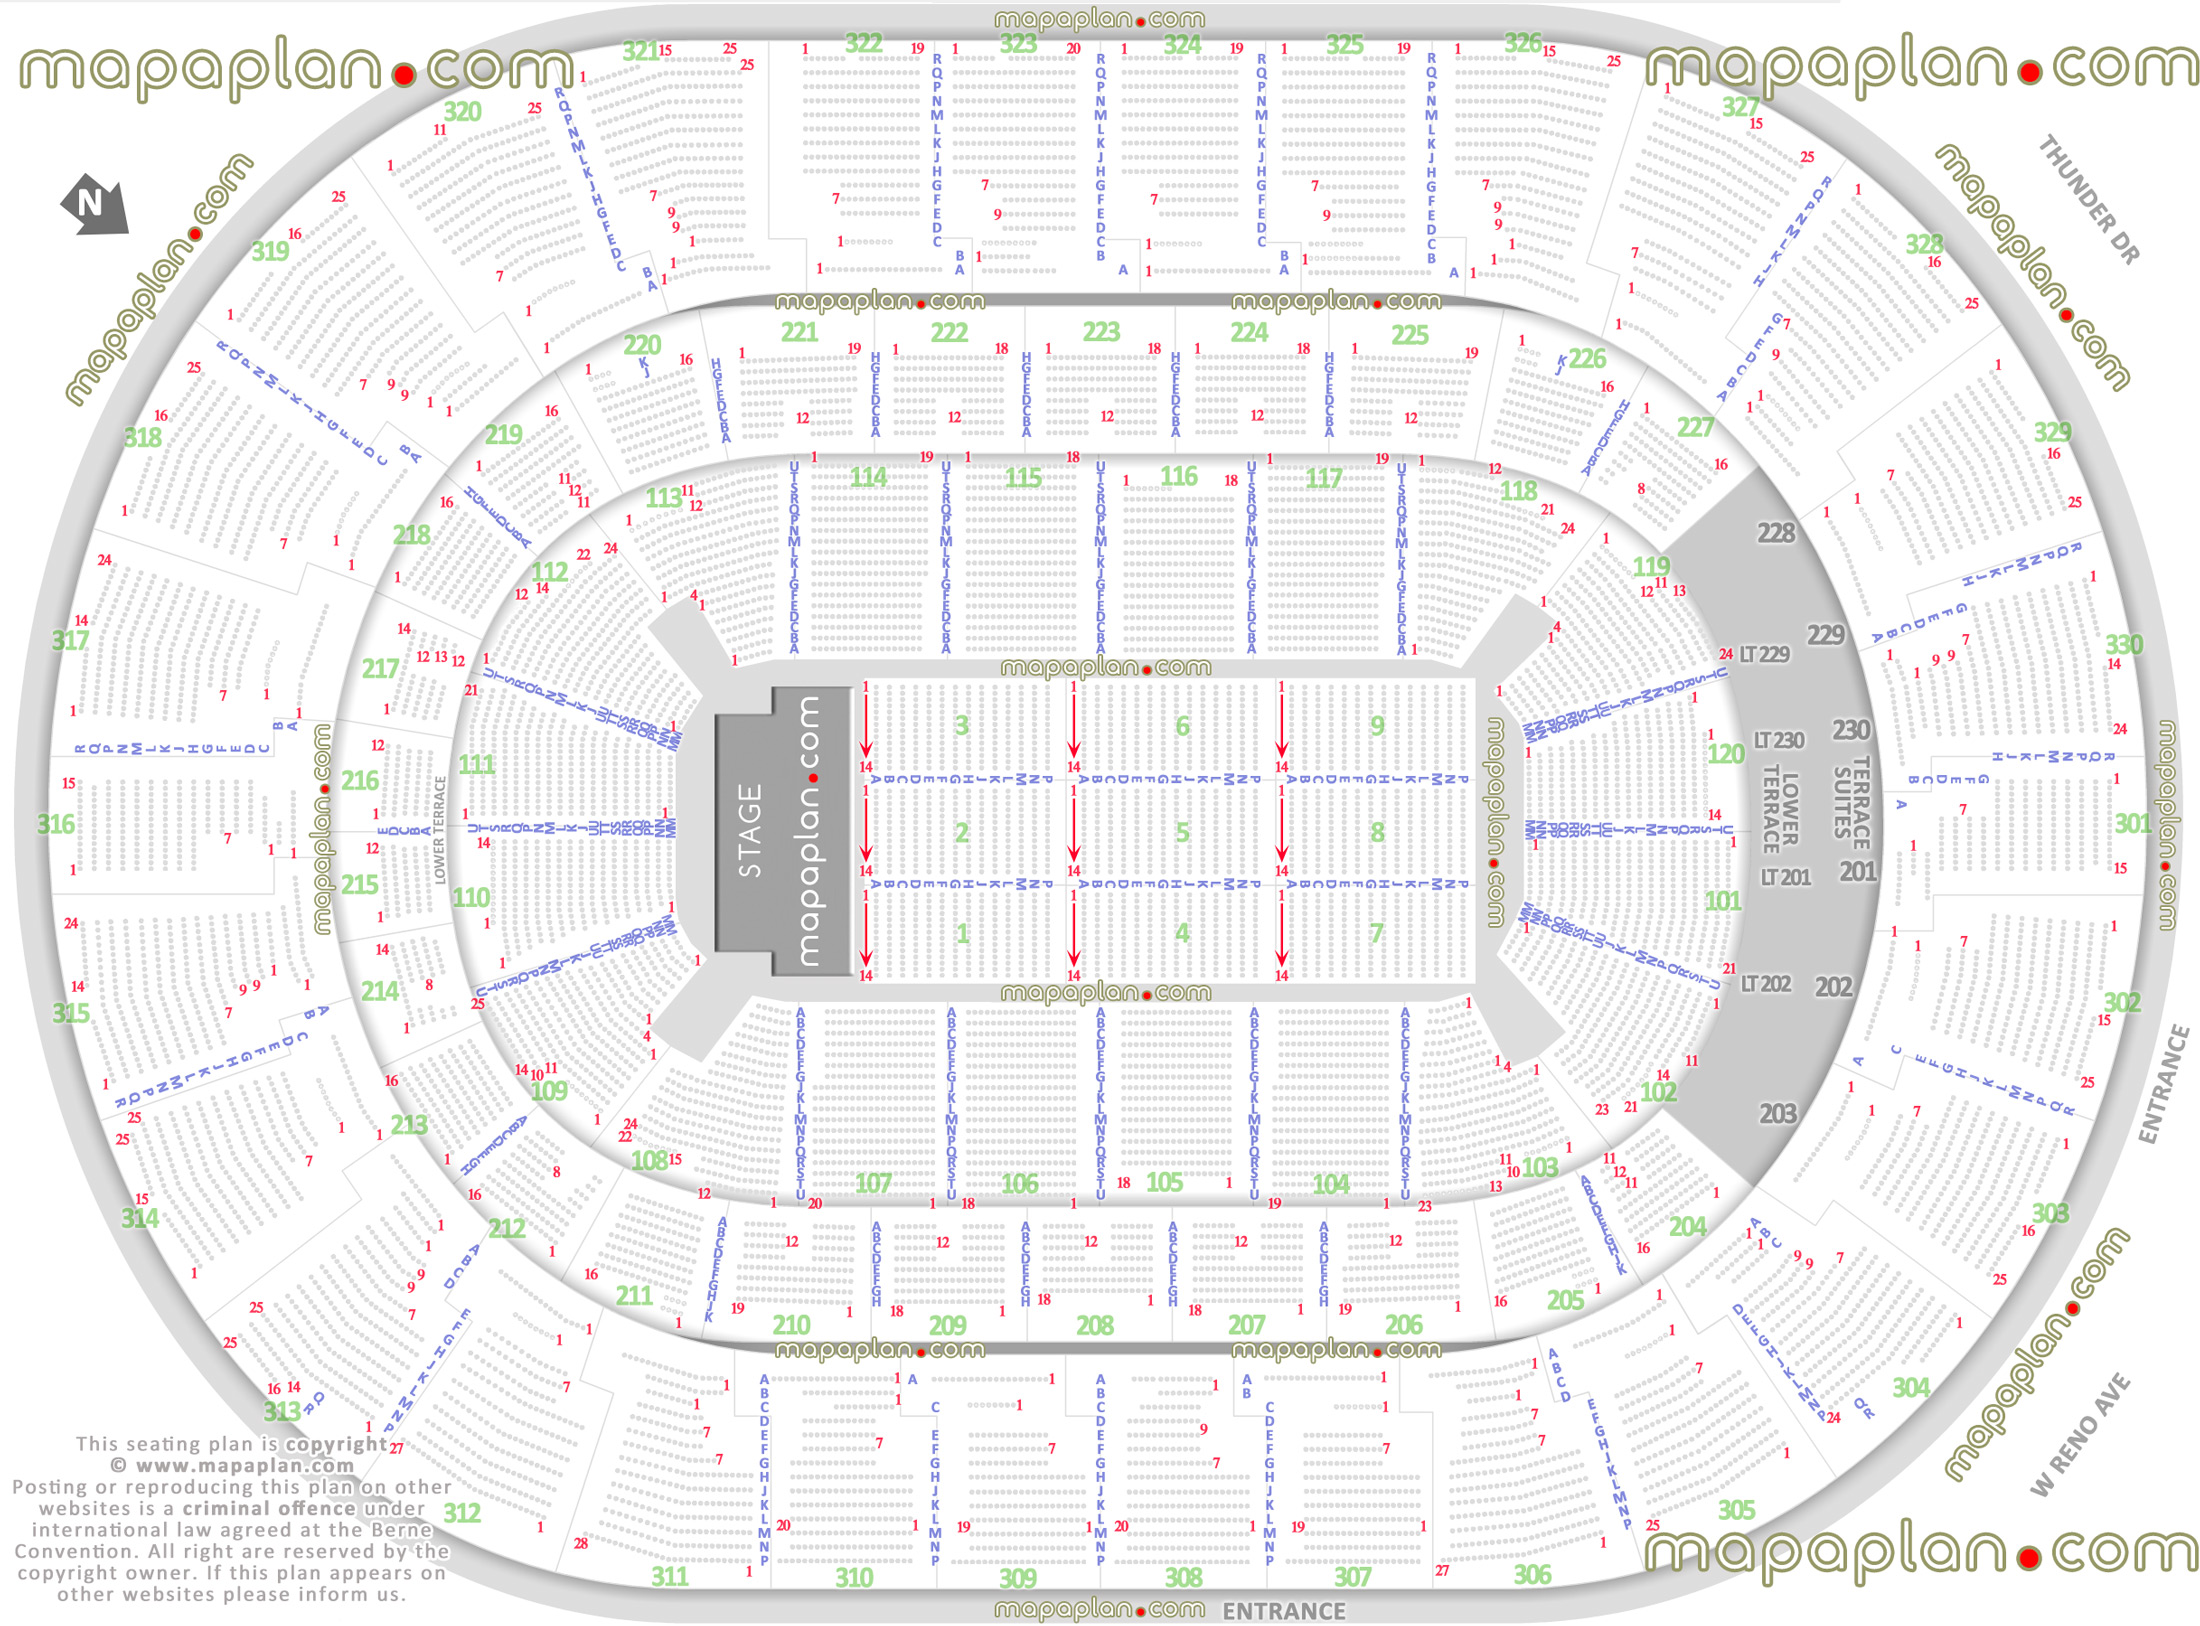 detailed seat row numbers end stage concert sections floor plan map arena lower club upper level layout Oklahoma City Paycom Center Arena seating chart